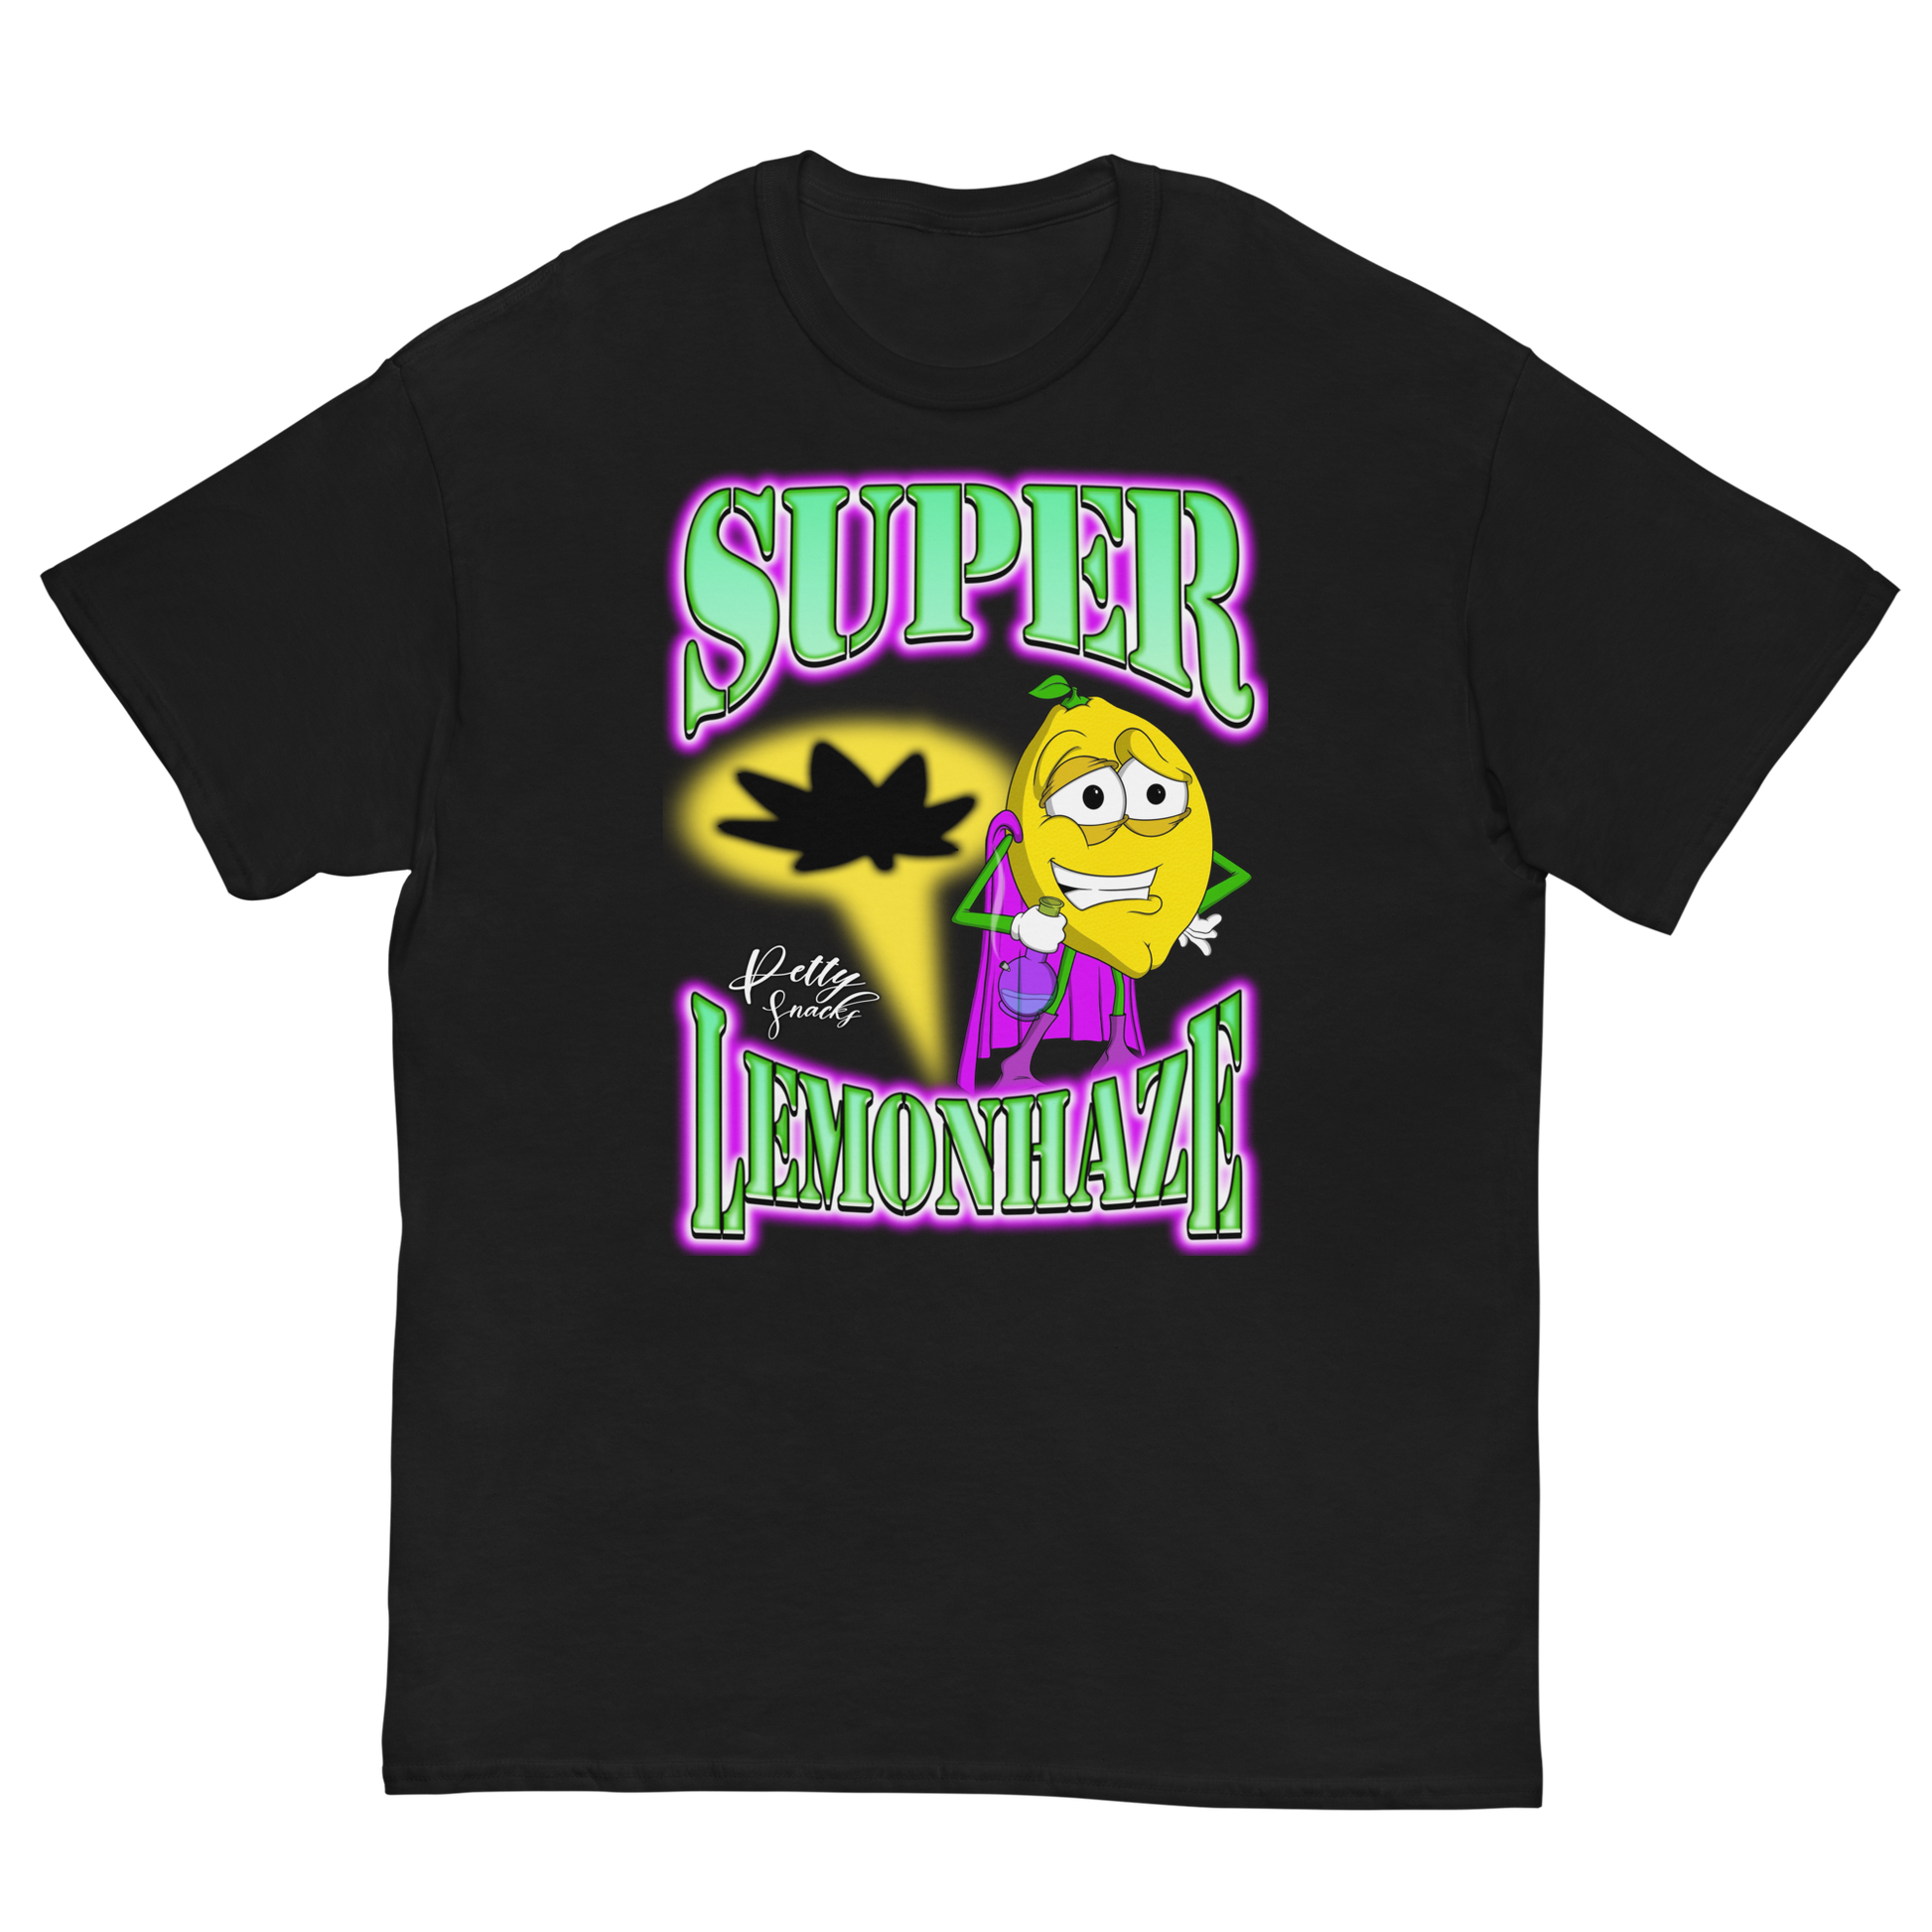 Black T-Shirt. Front center graphic. Top and Bottom lettering that reads "Super Lemon Haze" in green lettering with pink outer glow. A cartoon superhero Lemon Character is standing in a heroic pose with purple boots, a purple cape, and holding a bong. There is a yellow superhero spotlight shining behind the lemon with a weed leaf silhouette. Petty Snacks is written in small white cursive in center left area. 